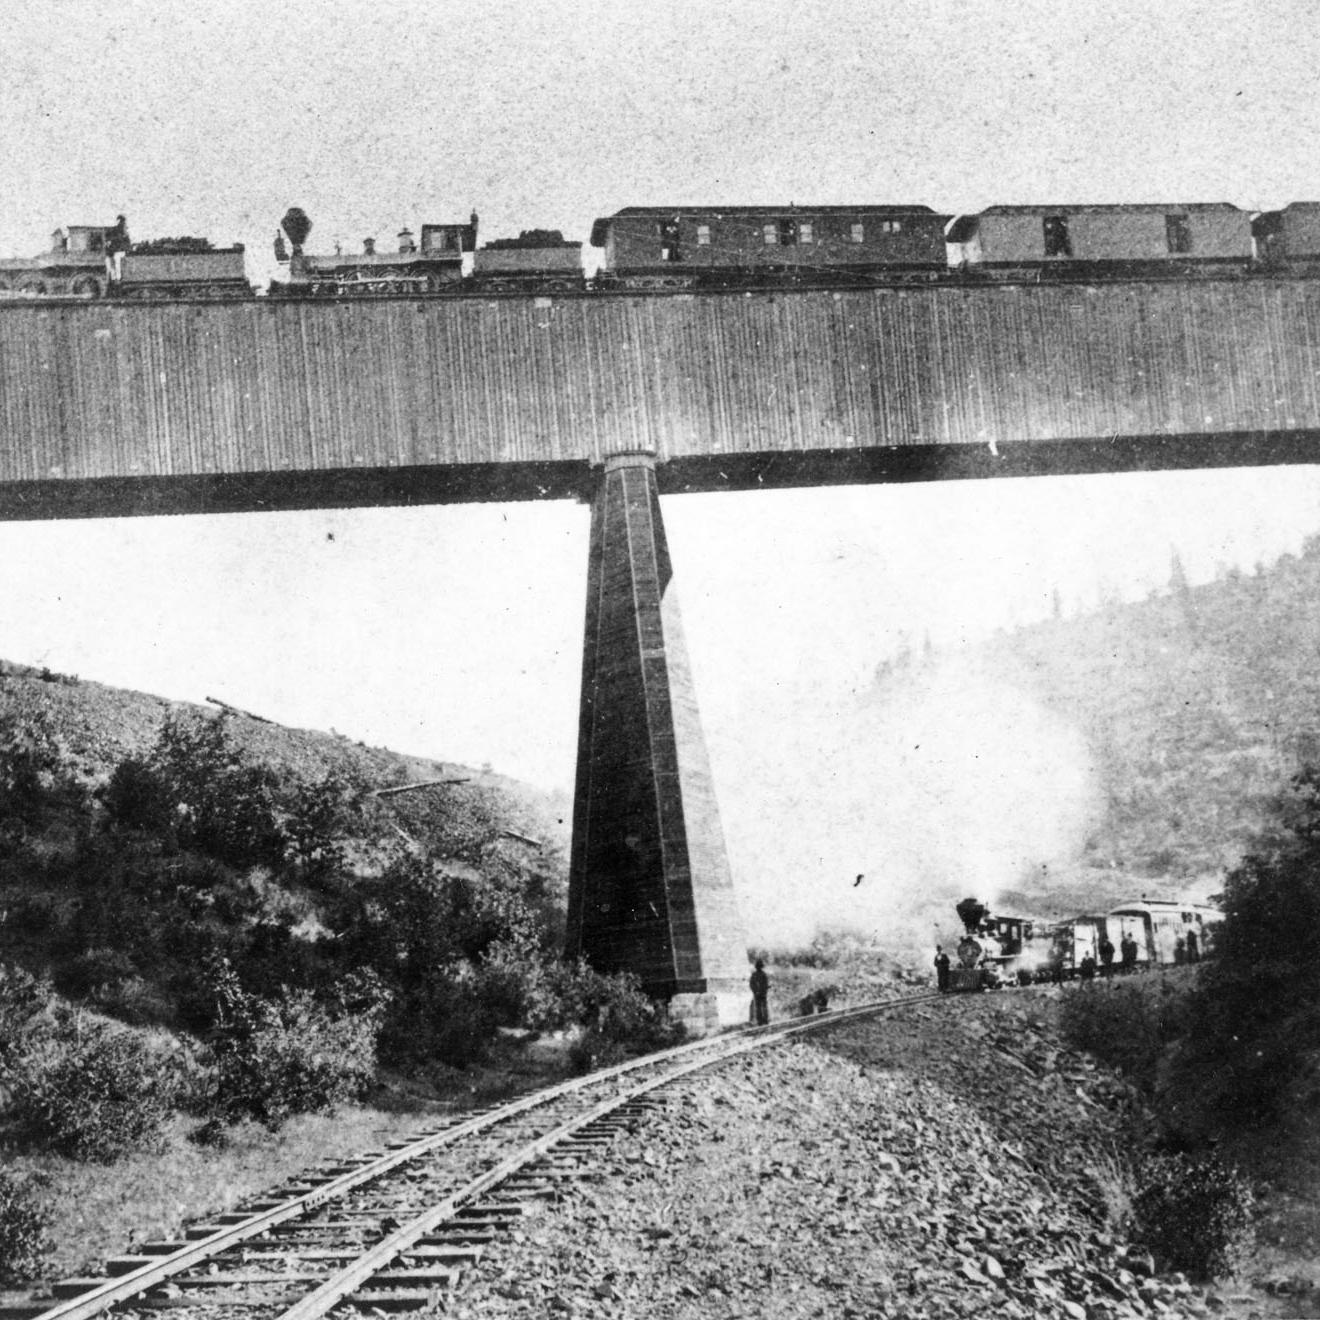 Trains meet at Long Ravine in the 1870s.